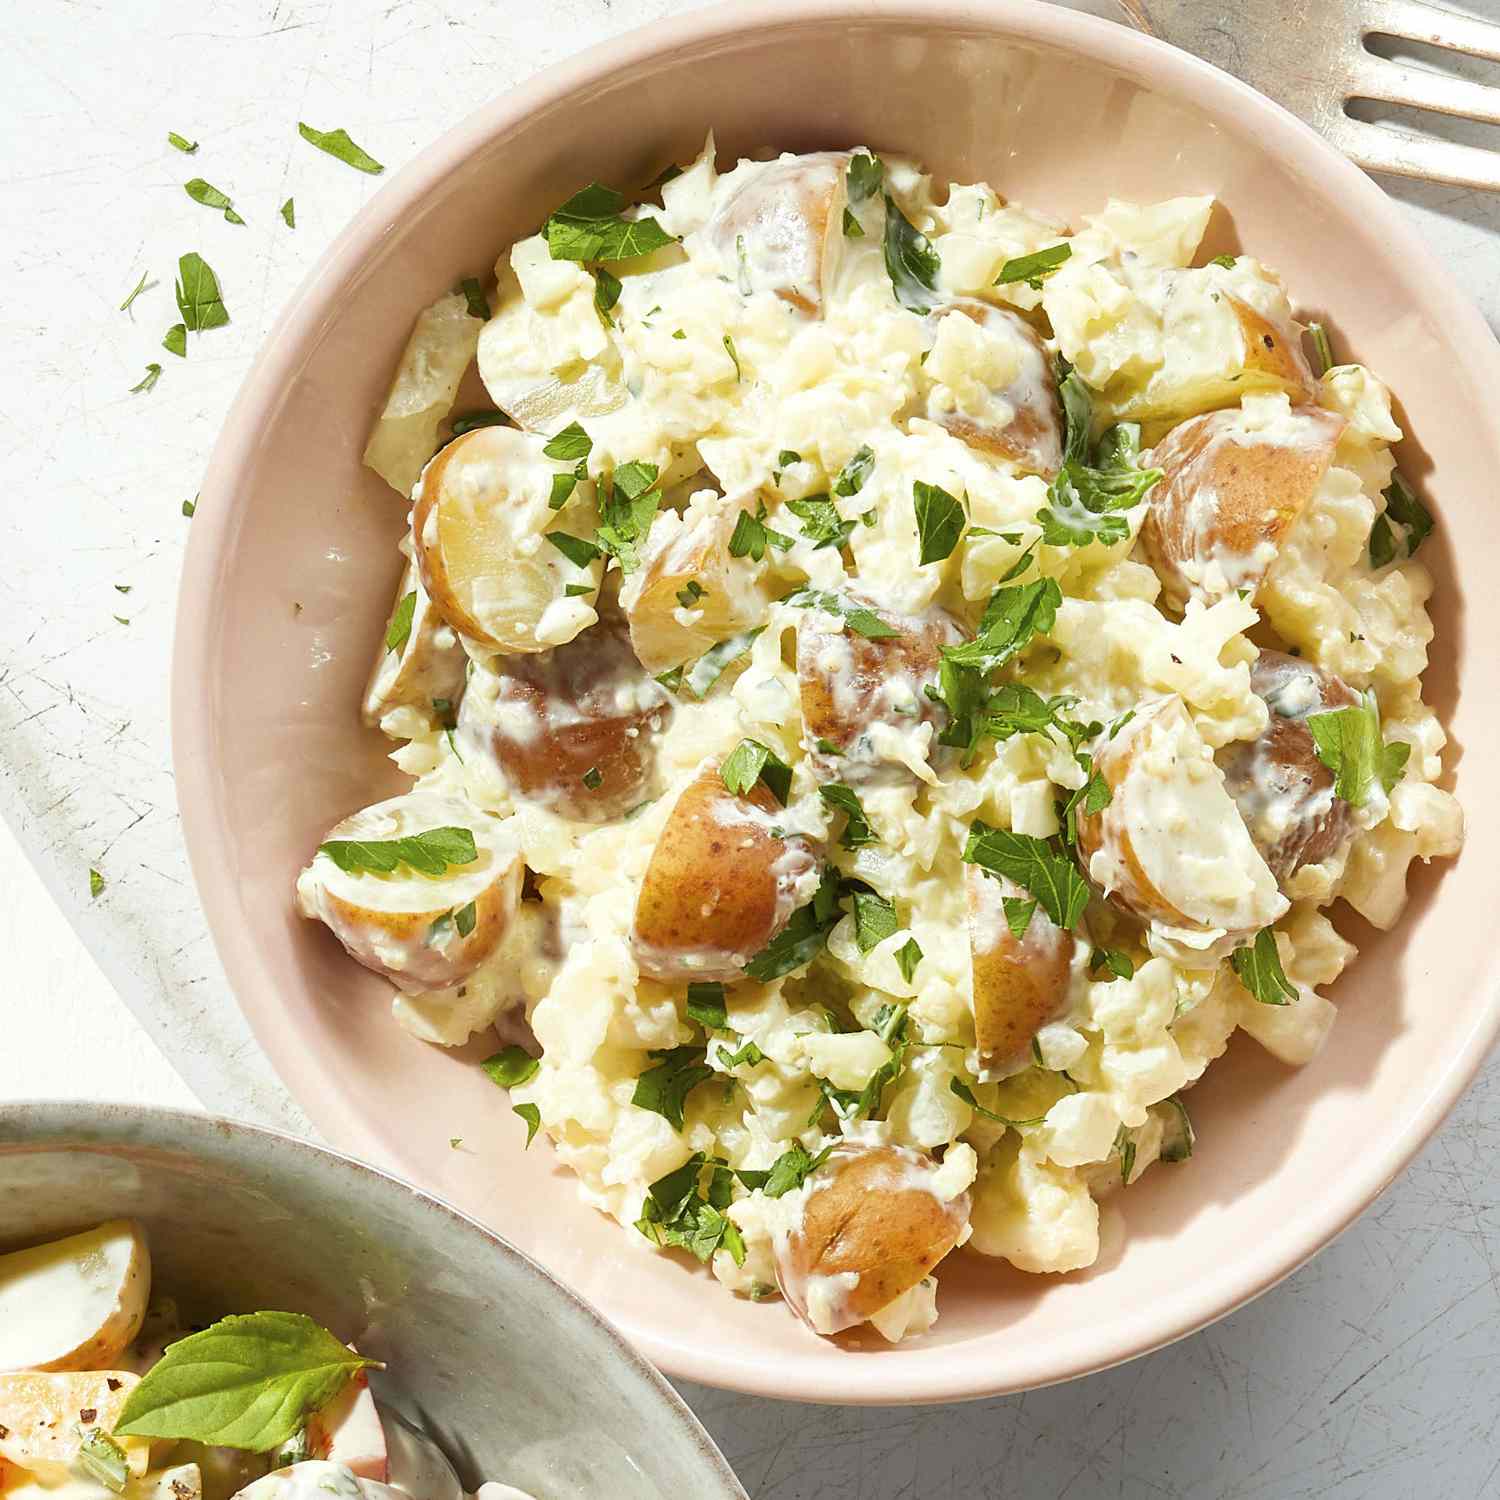 What Are the Best Potatoes for Potato Salad?